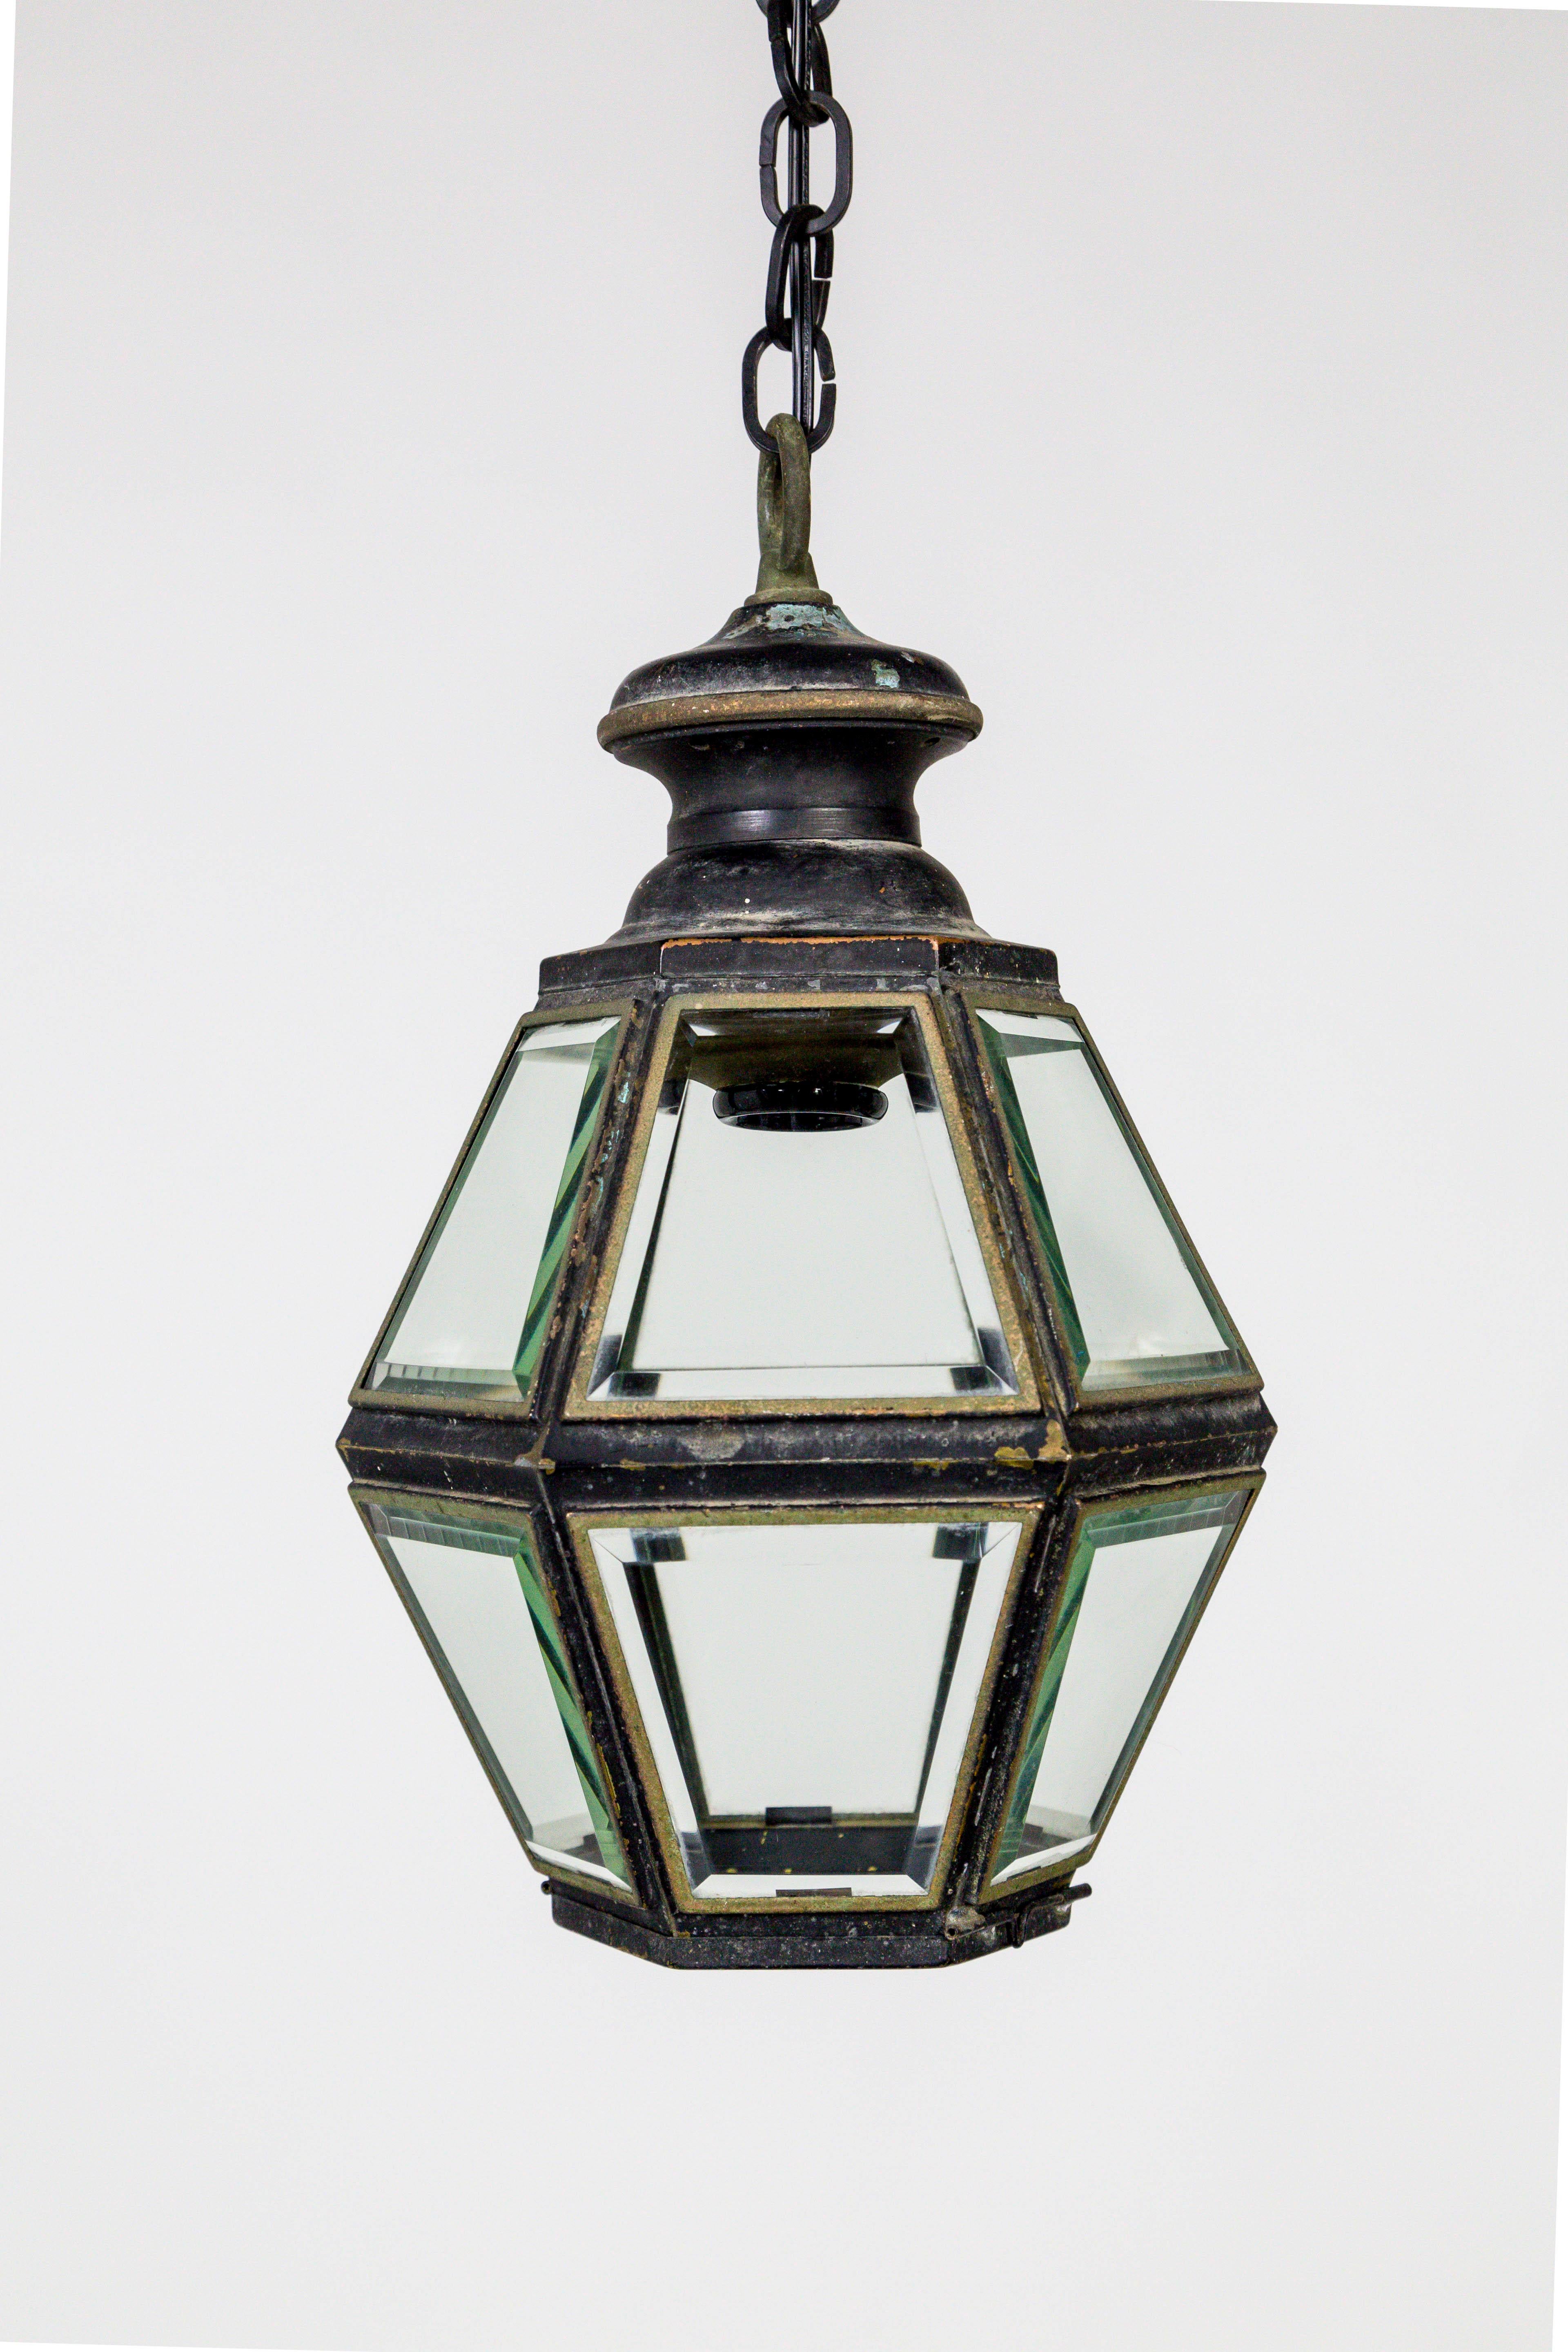 Wonderful 1950s, American Colonial Revival style, hexagon, metalwork lanterns. Completely closed with beautiful, beveled glass; the bottom panel is etched with a flower shape, and opens to change the bulb; multiple paint layers and copper green